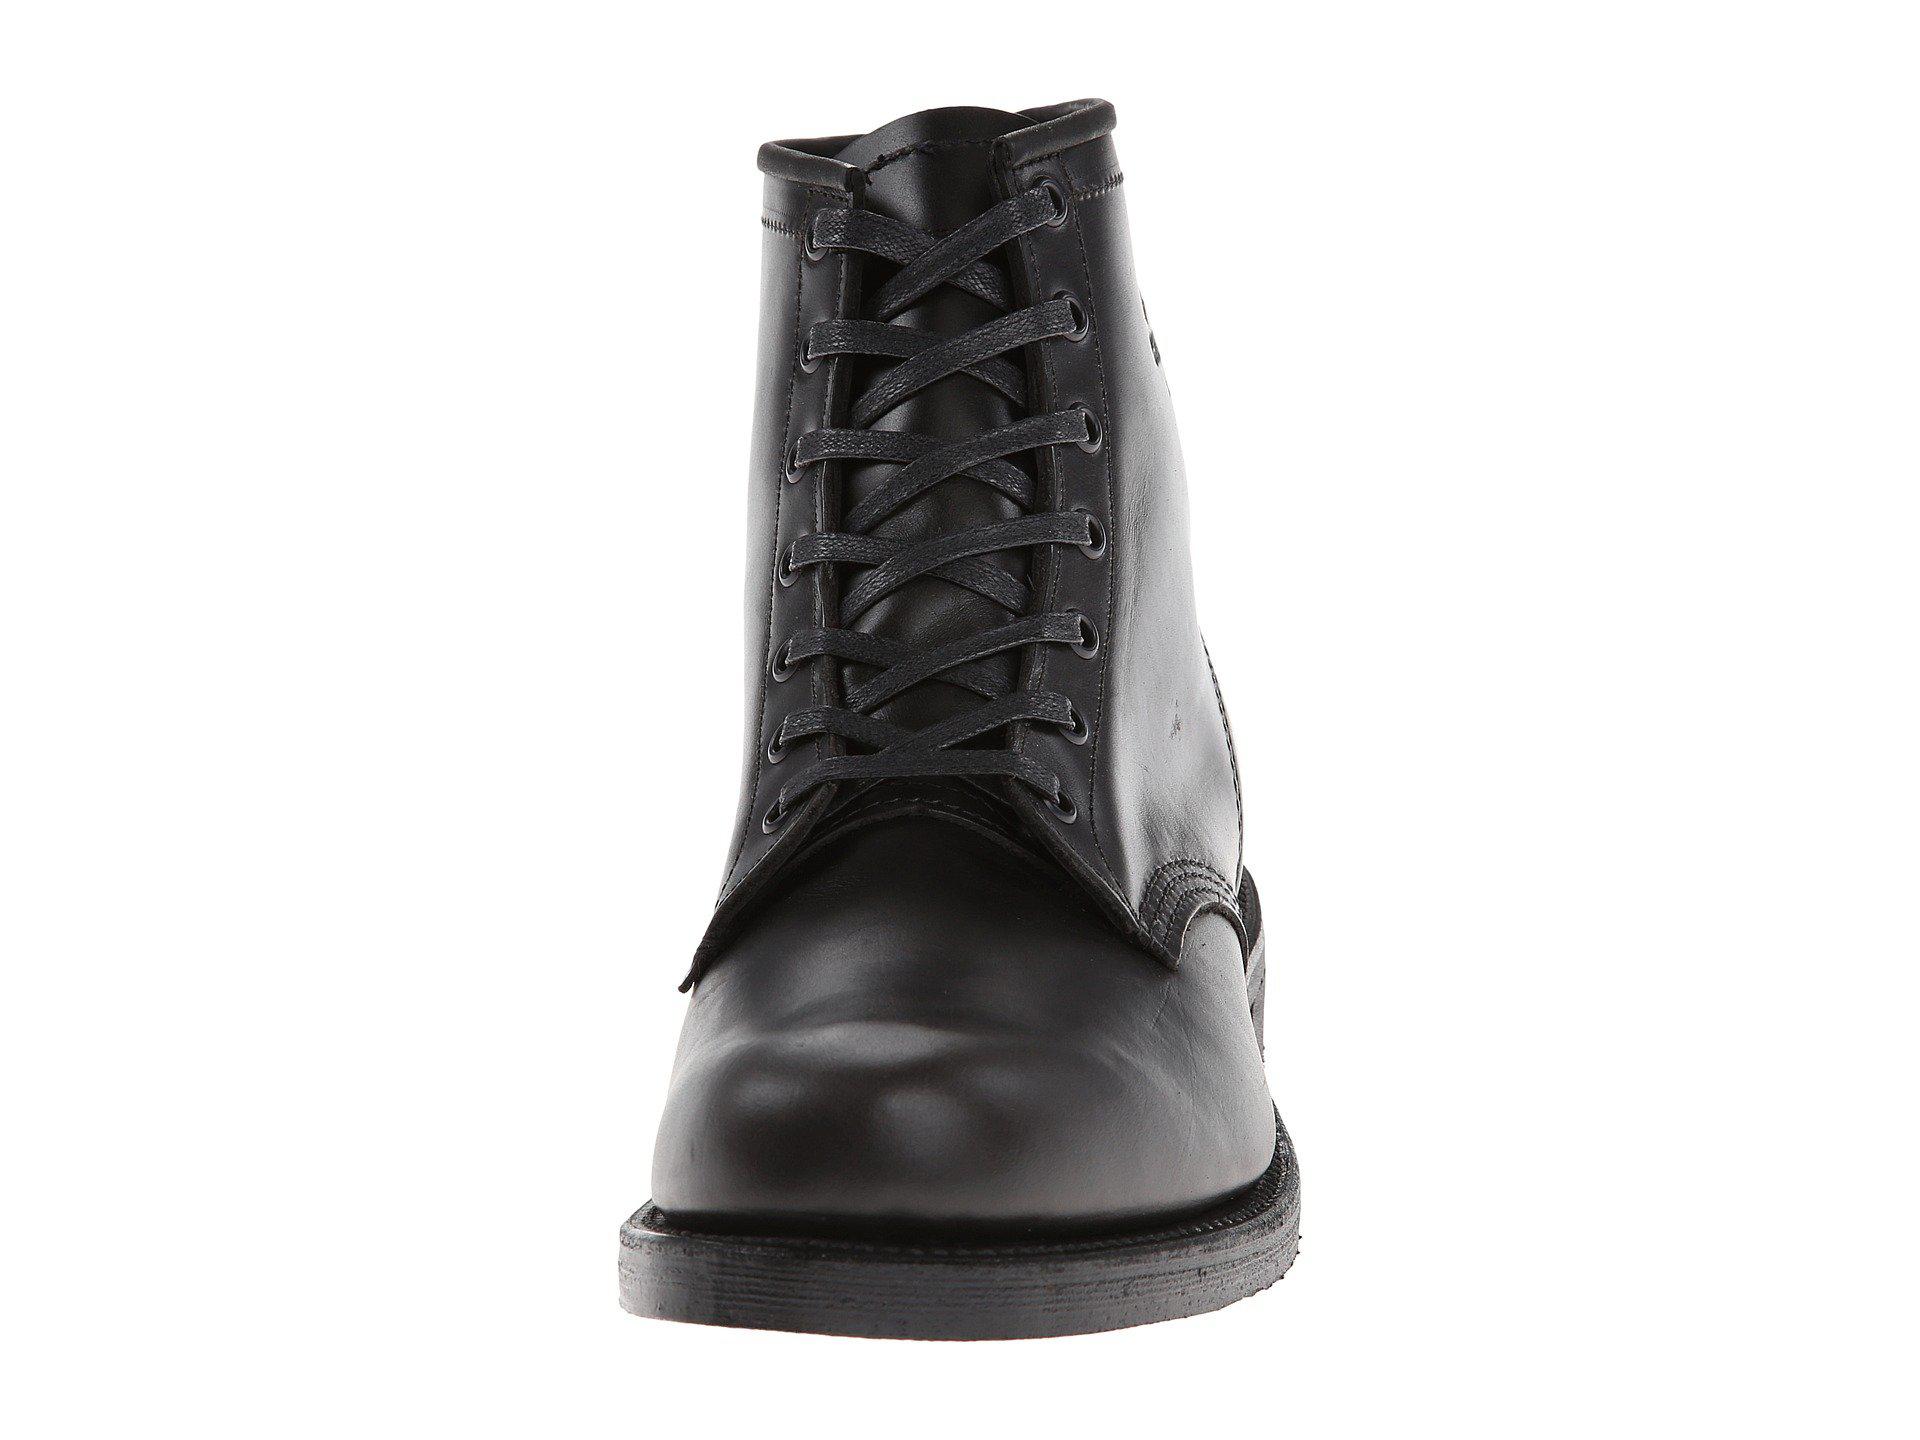 Chippewa Service Boot in Black for Men - Lyst